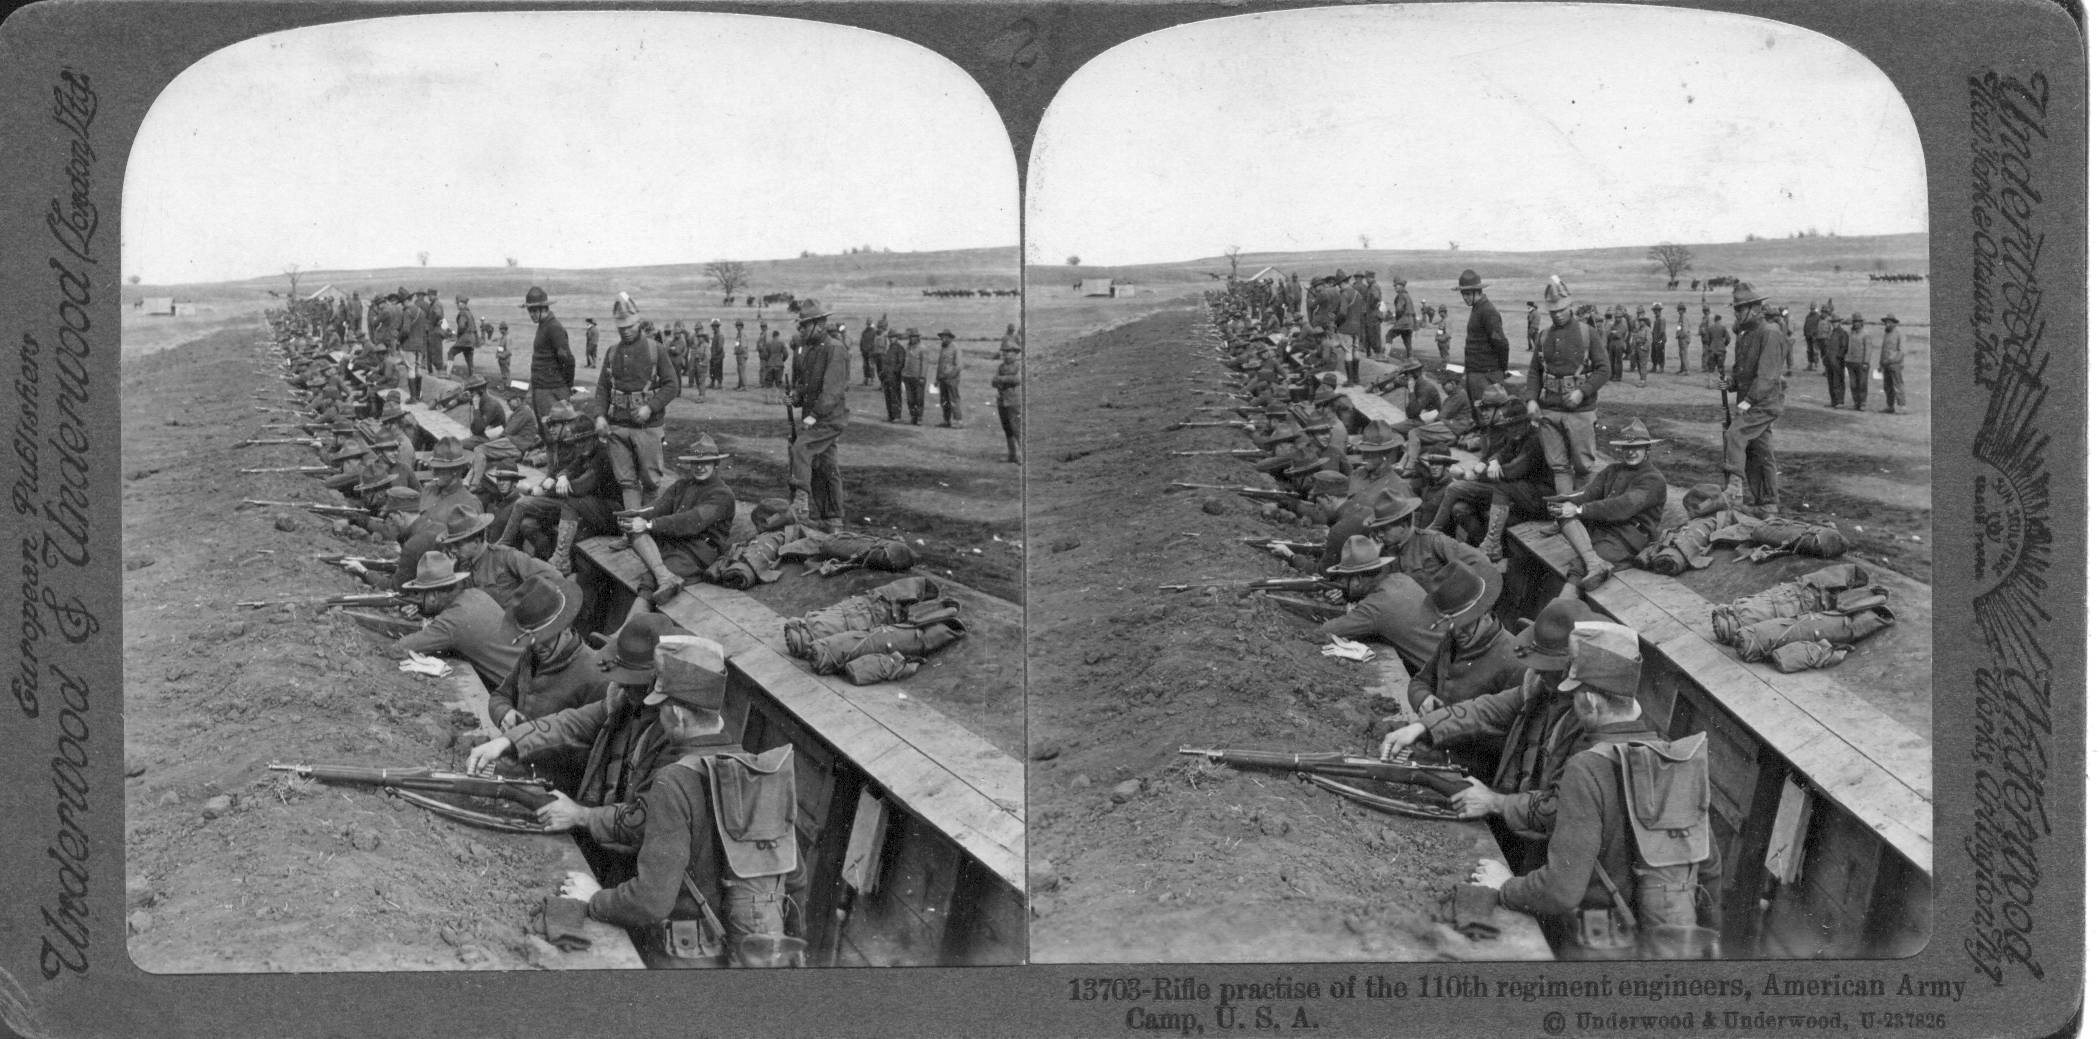 Rifle practise of the 110th regiment engineers, American Army Camp, U.S.A.